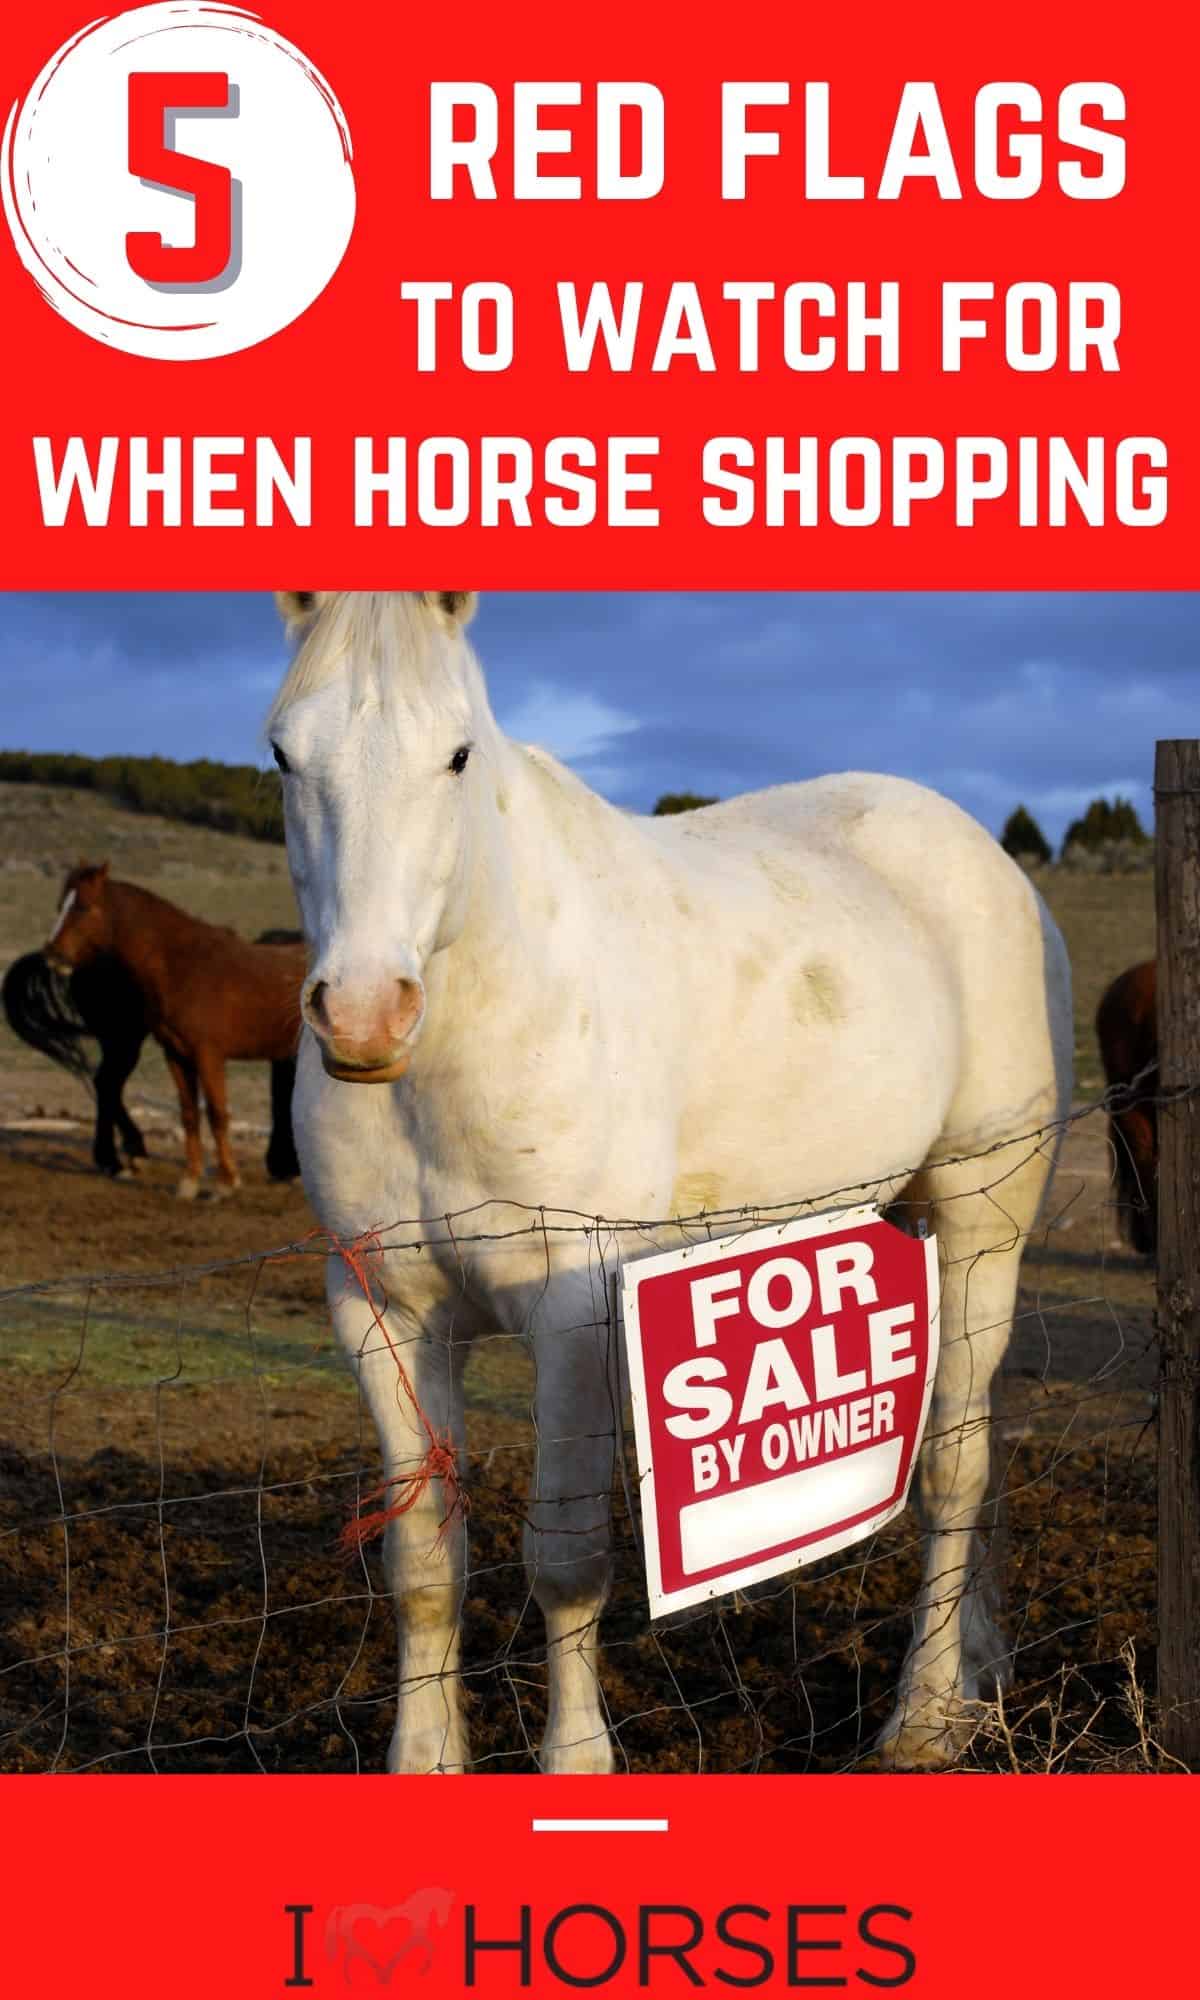 5 Horse Shopping Red Flags to Watch For When Buying a New Horse